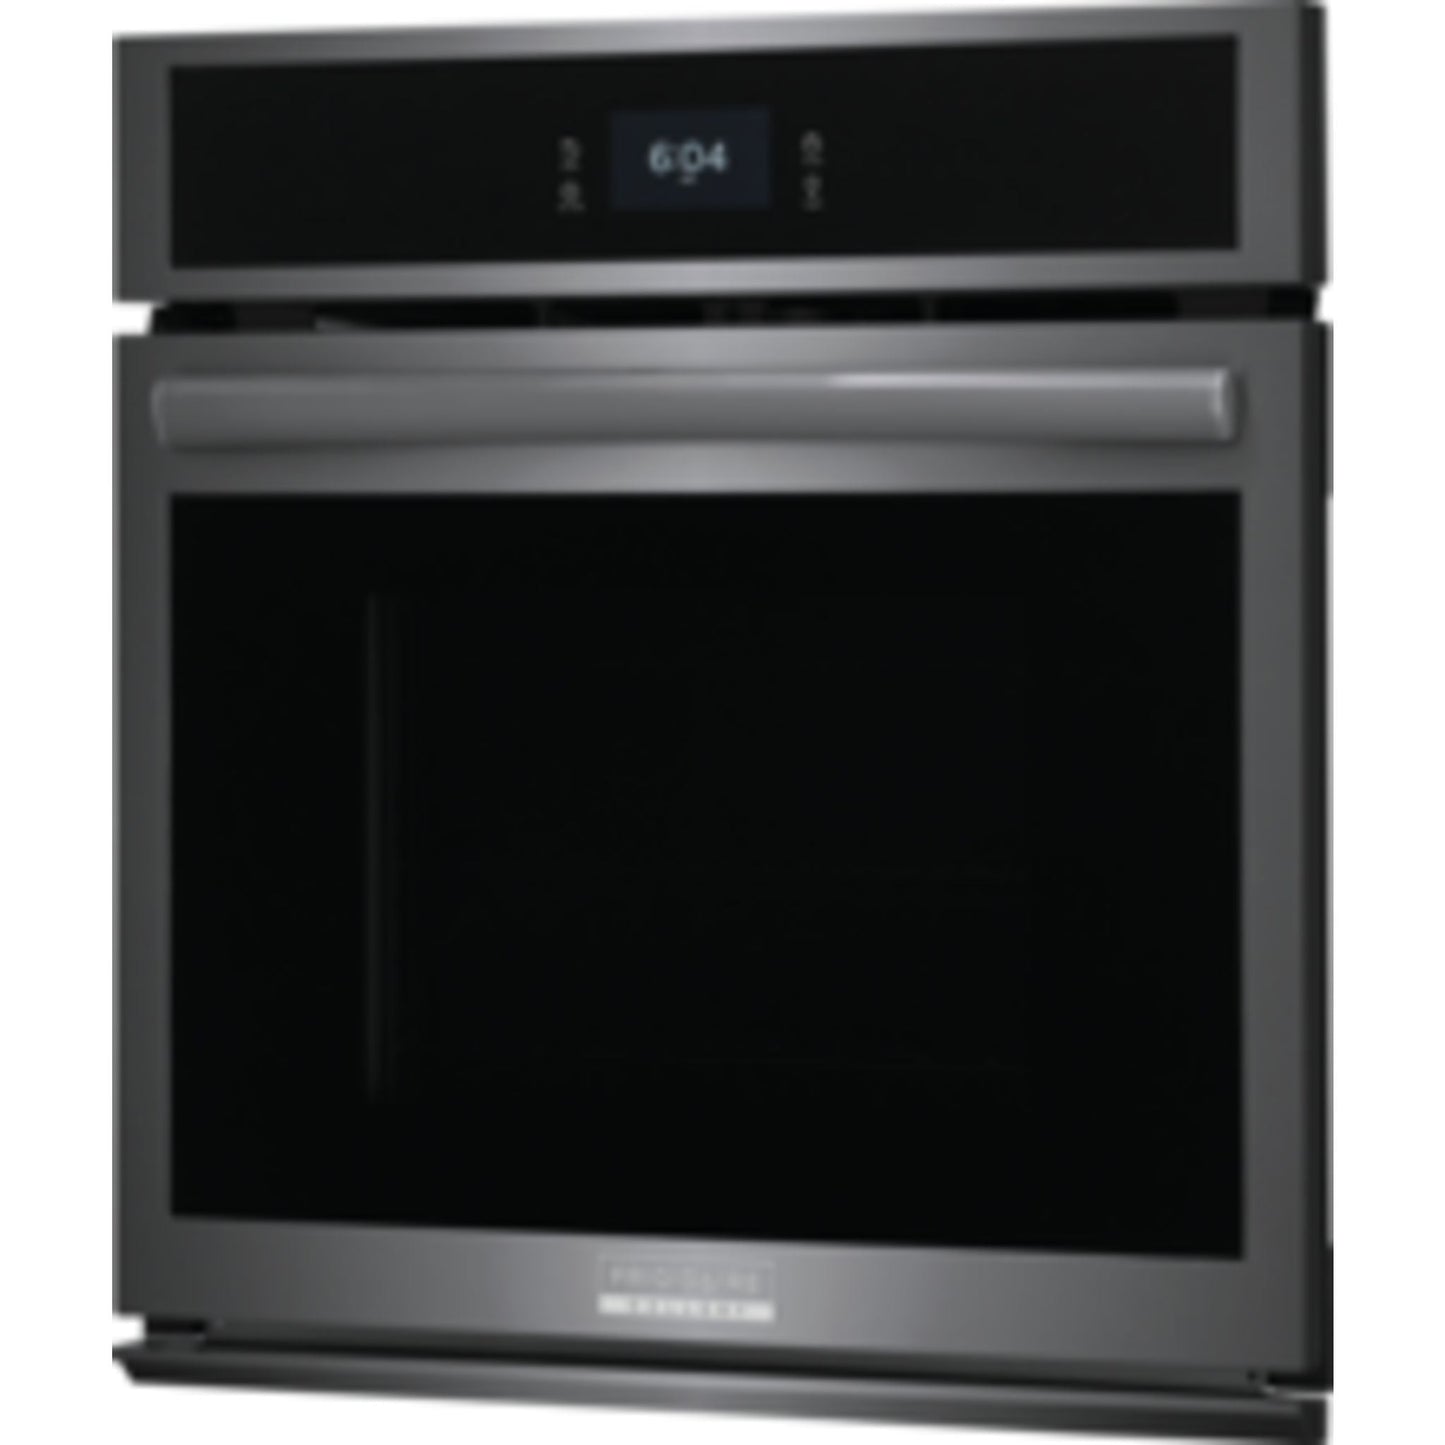 Frigidaire Gallery 27" Convection Wall Oven (GCWS2767AD) - Black Stainless, SmudgeProof